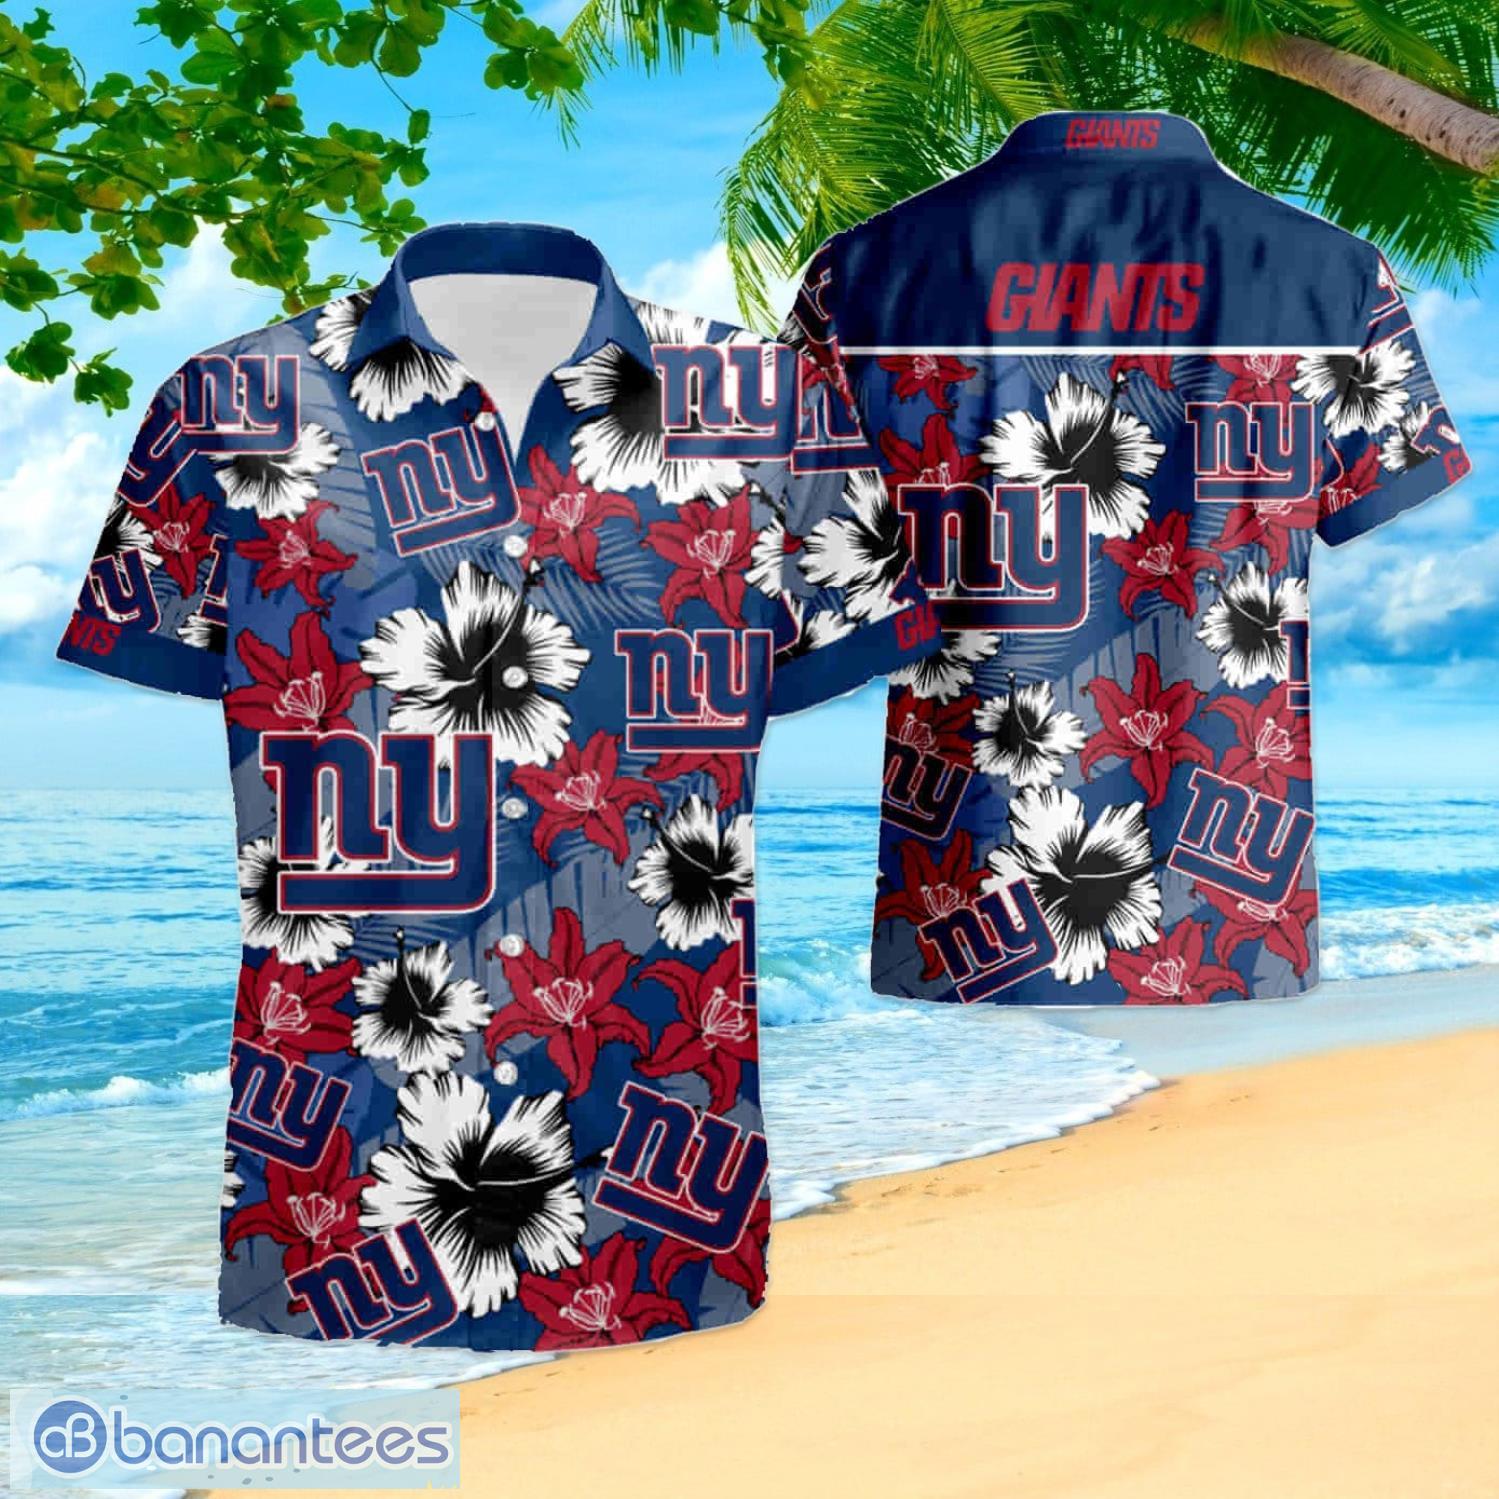 giants button up jersey